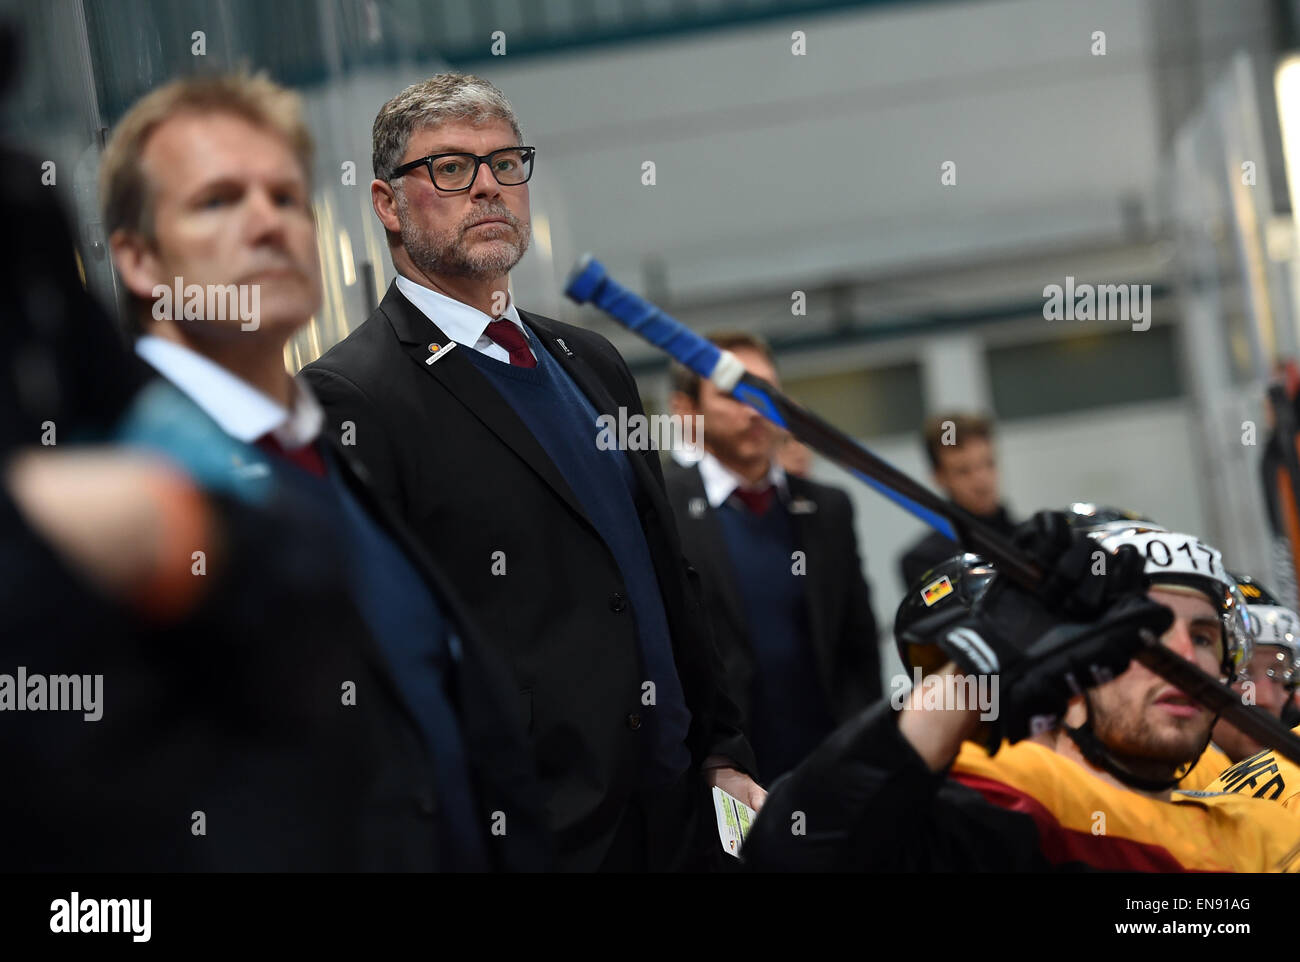 Germany's Pat Cortina watches at the International Ice Hockey match between Germany and Slovenia in the Wellblech Palace in Berlin, Germany, 29 April 2015. Photo: BRITTA PEDERSEN/dpa Stock Photo